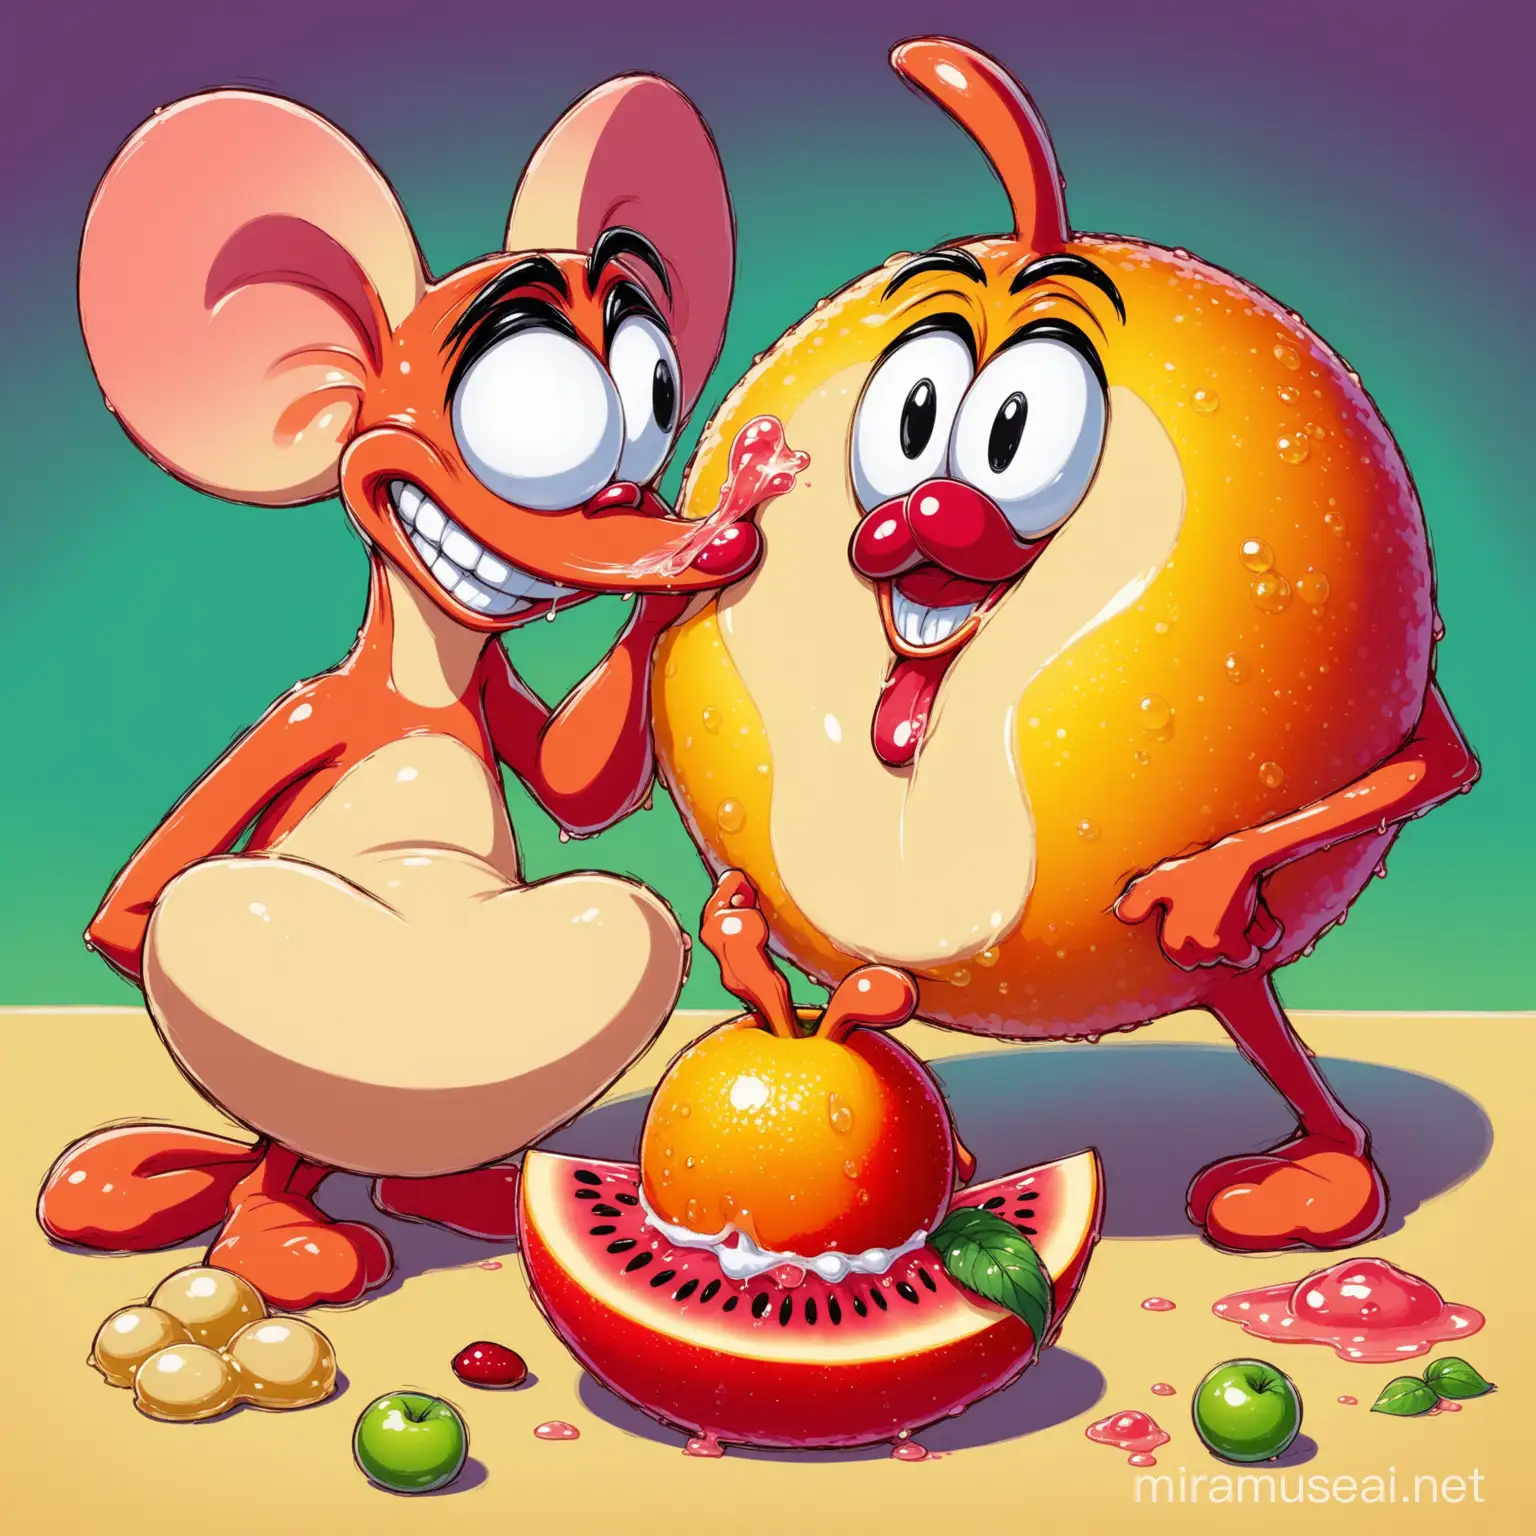 Ren & Stimpy squishing a Fruit, very stoned after taking dabs